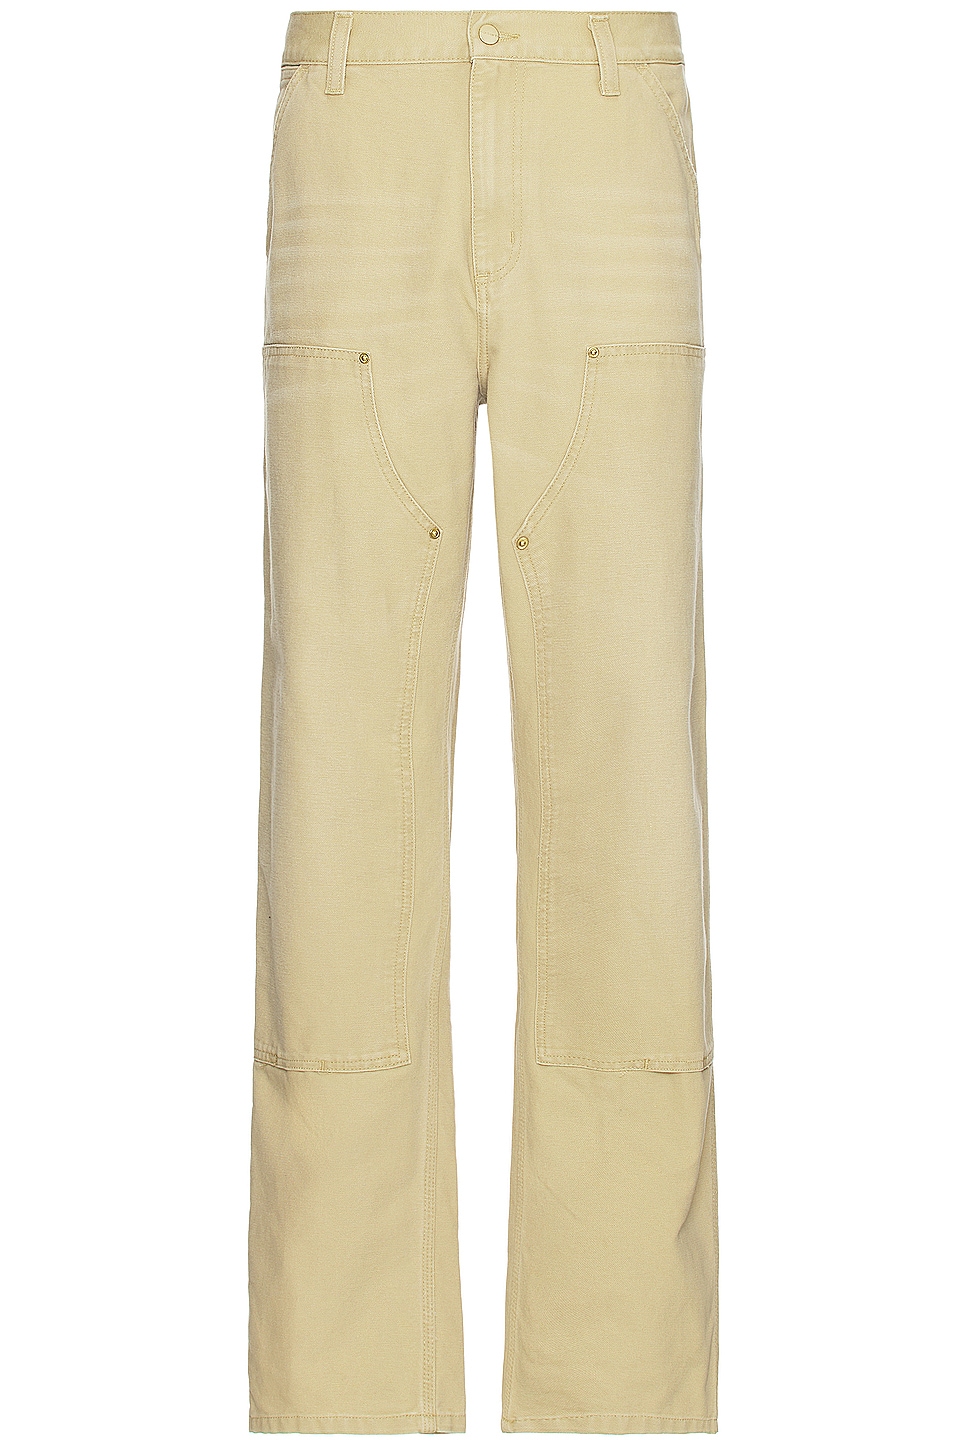 Image 1 of Carhartt WIP Double Knee Pant in Bourbon